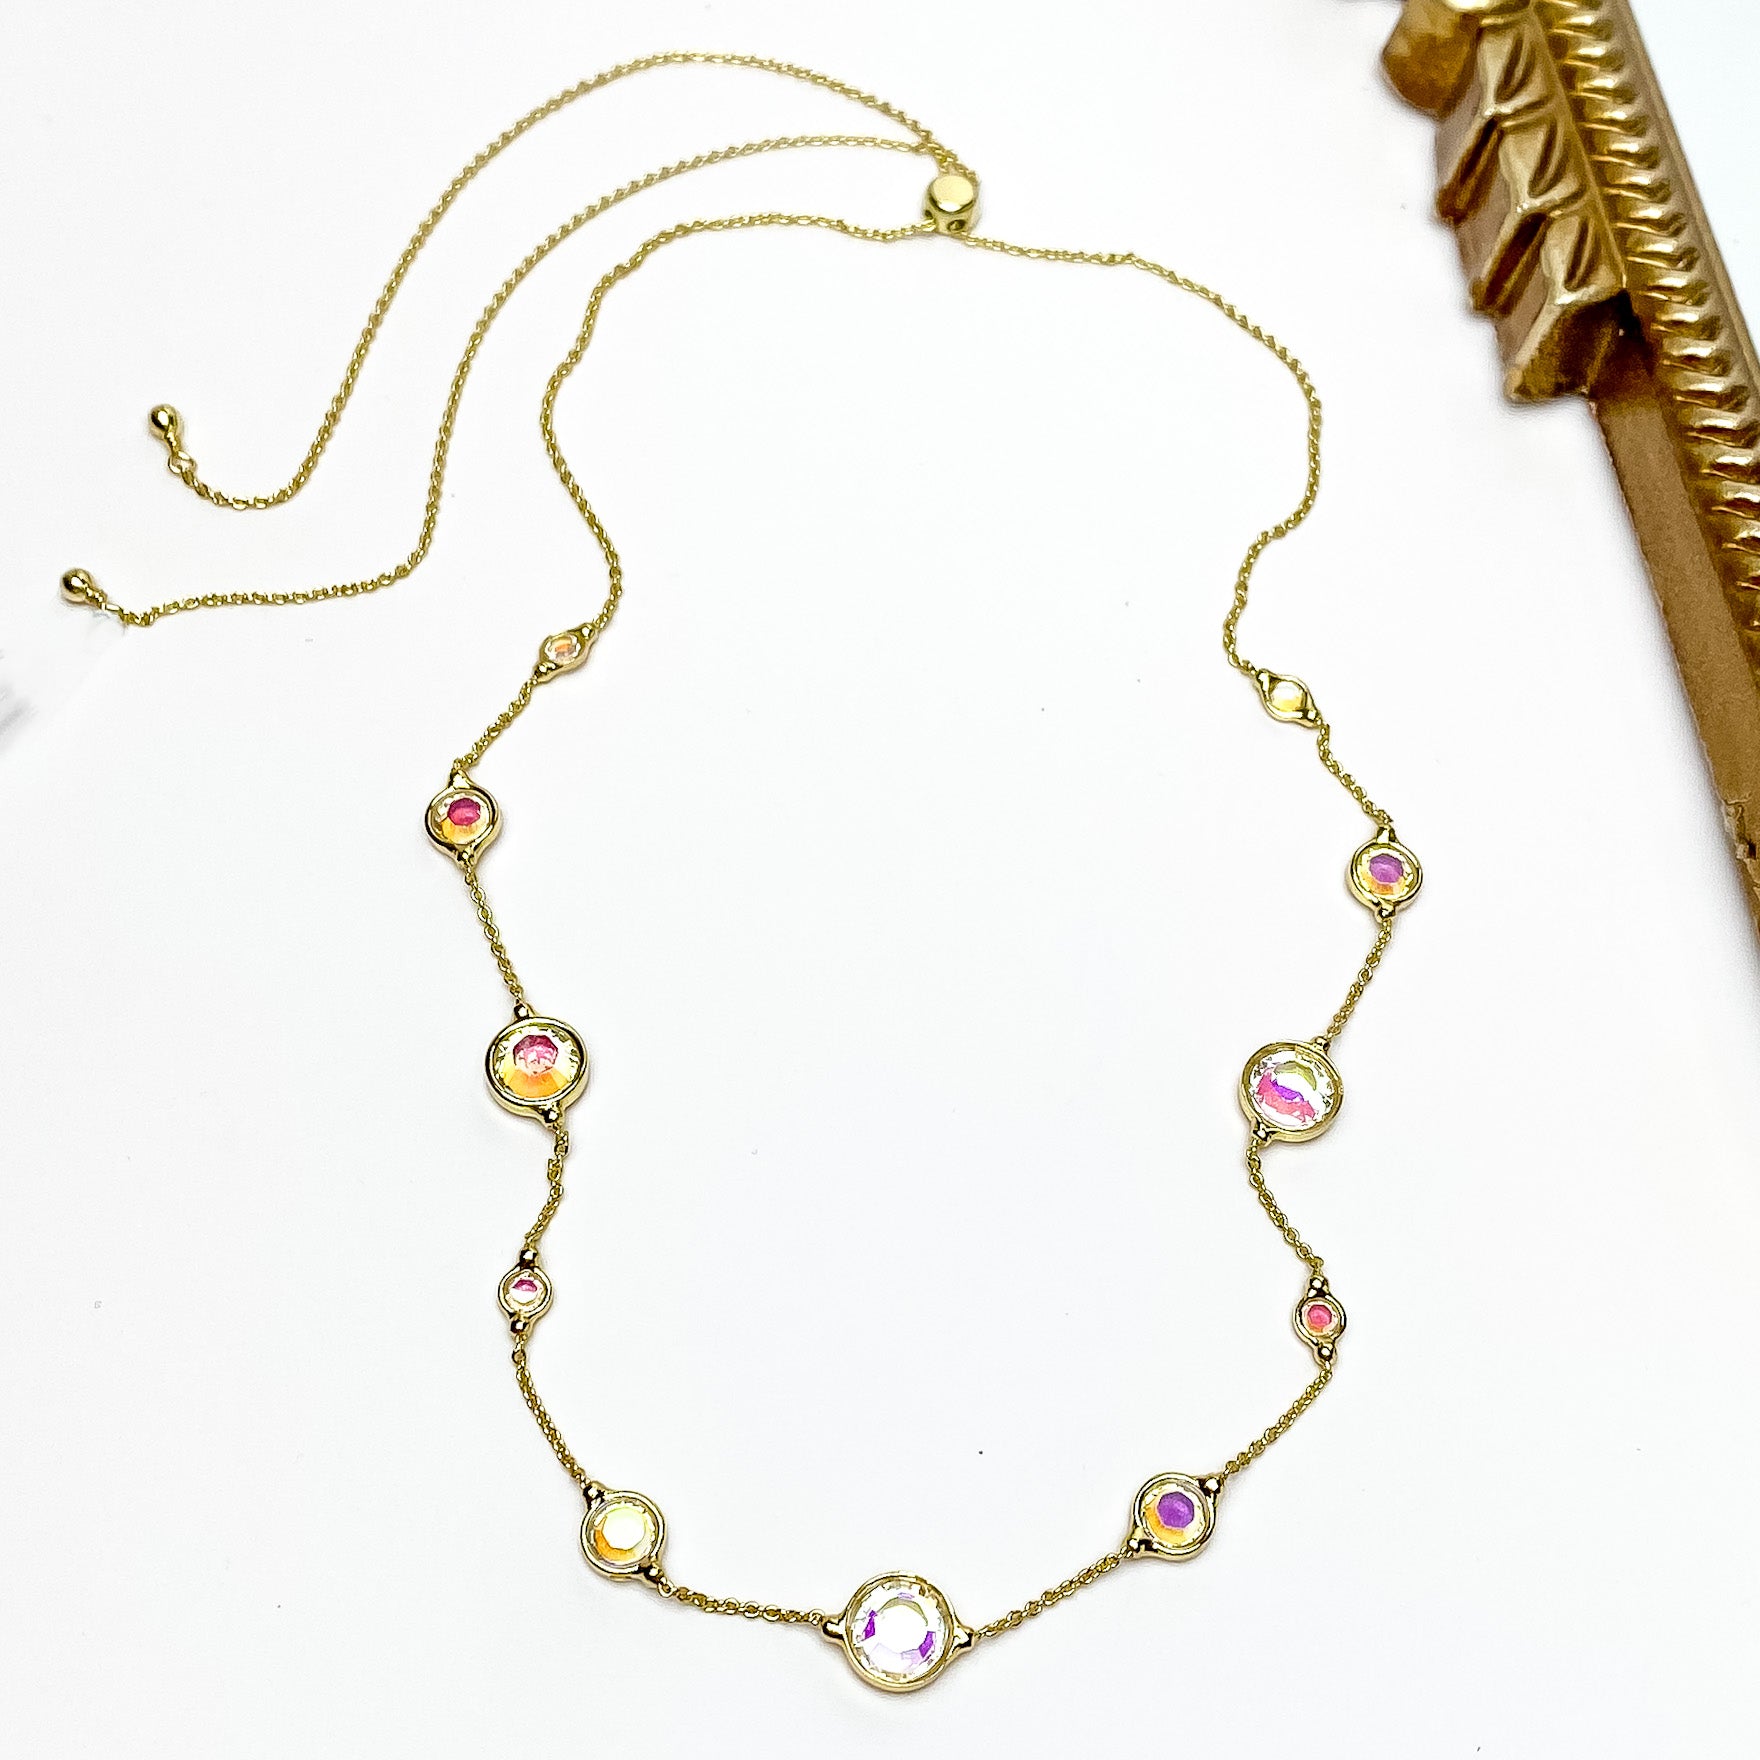 Pictured is a thin, gold chain with spaced out circle ab crystals. These crystals also come in different sizes. This necklace is pictured on a white background with a gold mirror to the right of the necklace.    